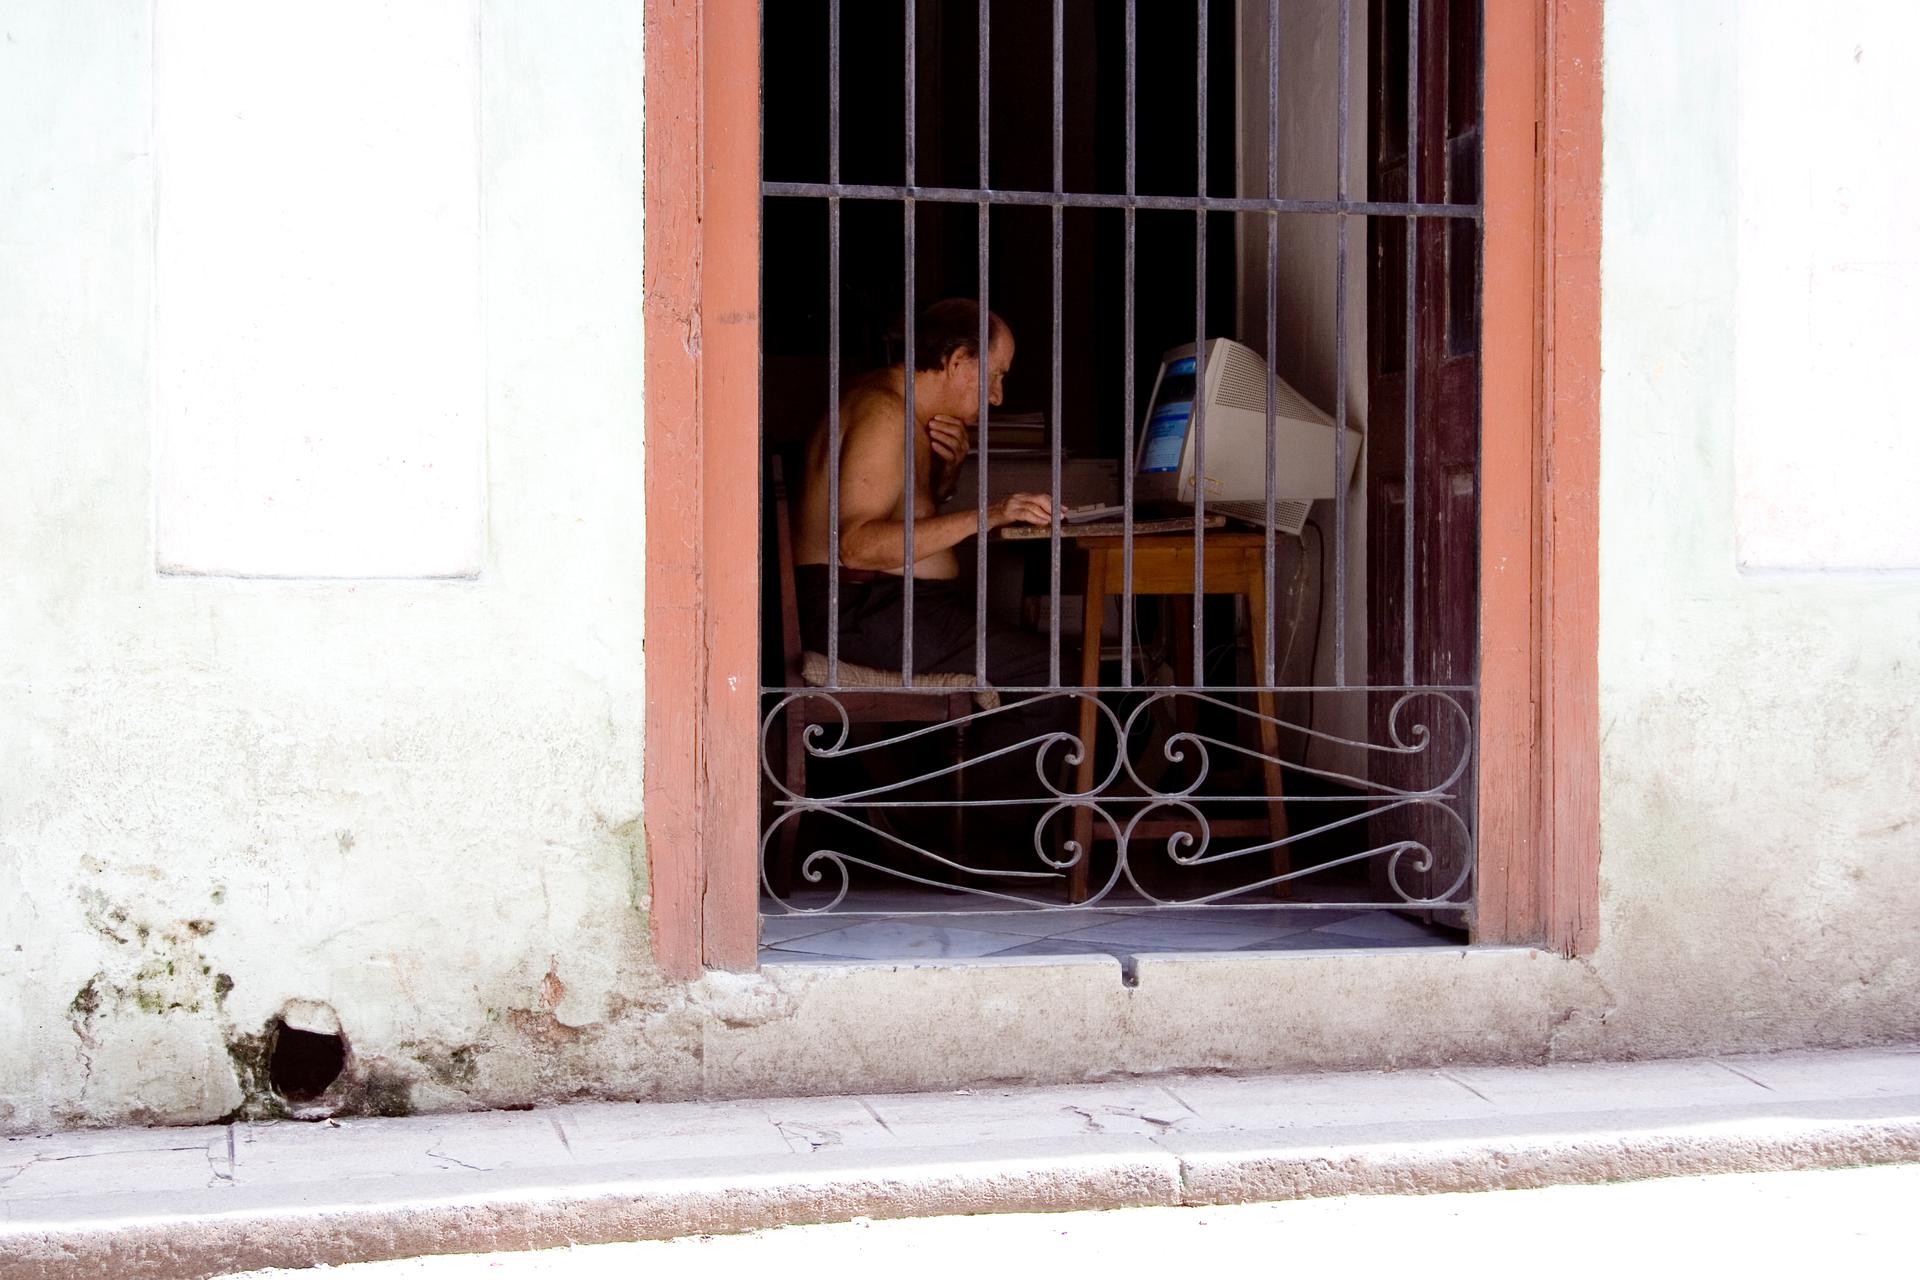 A Man Uses A Computer in Cuba